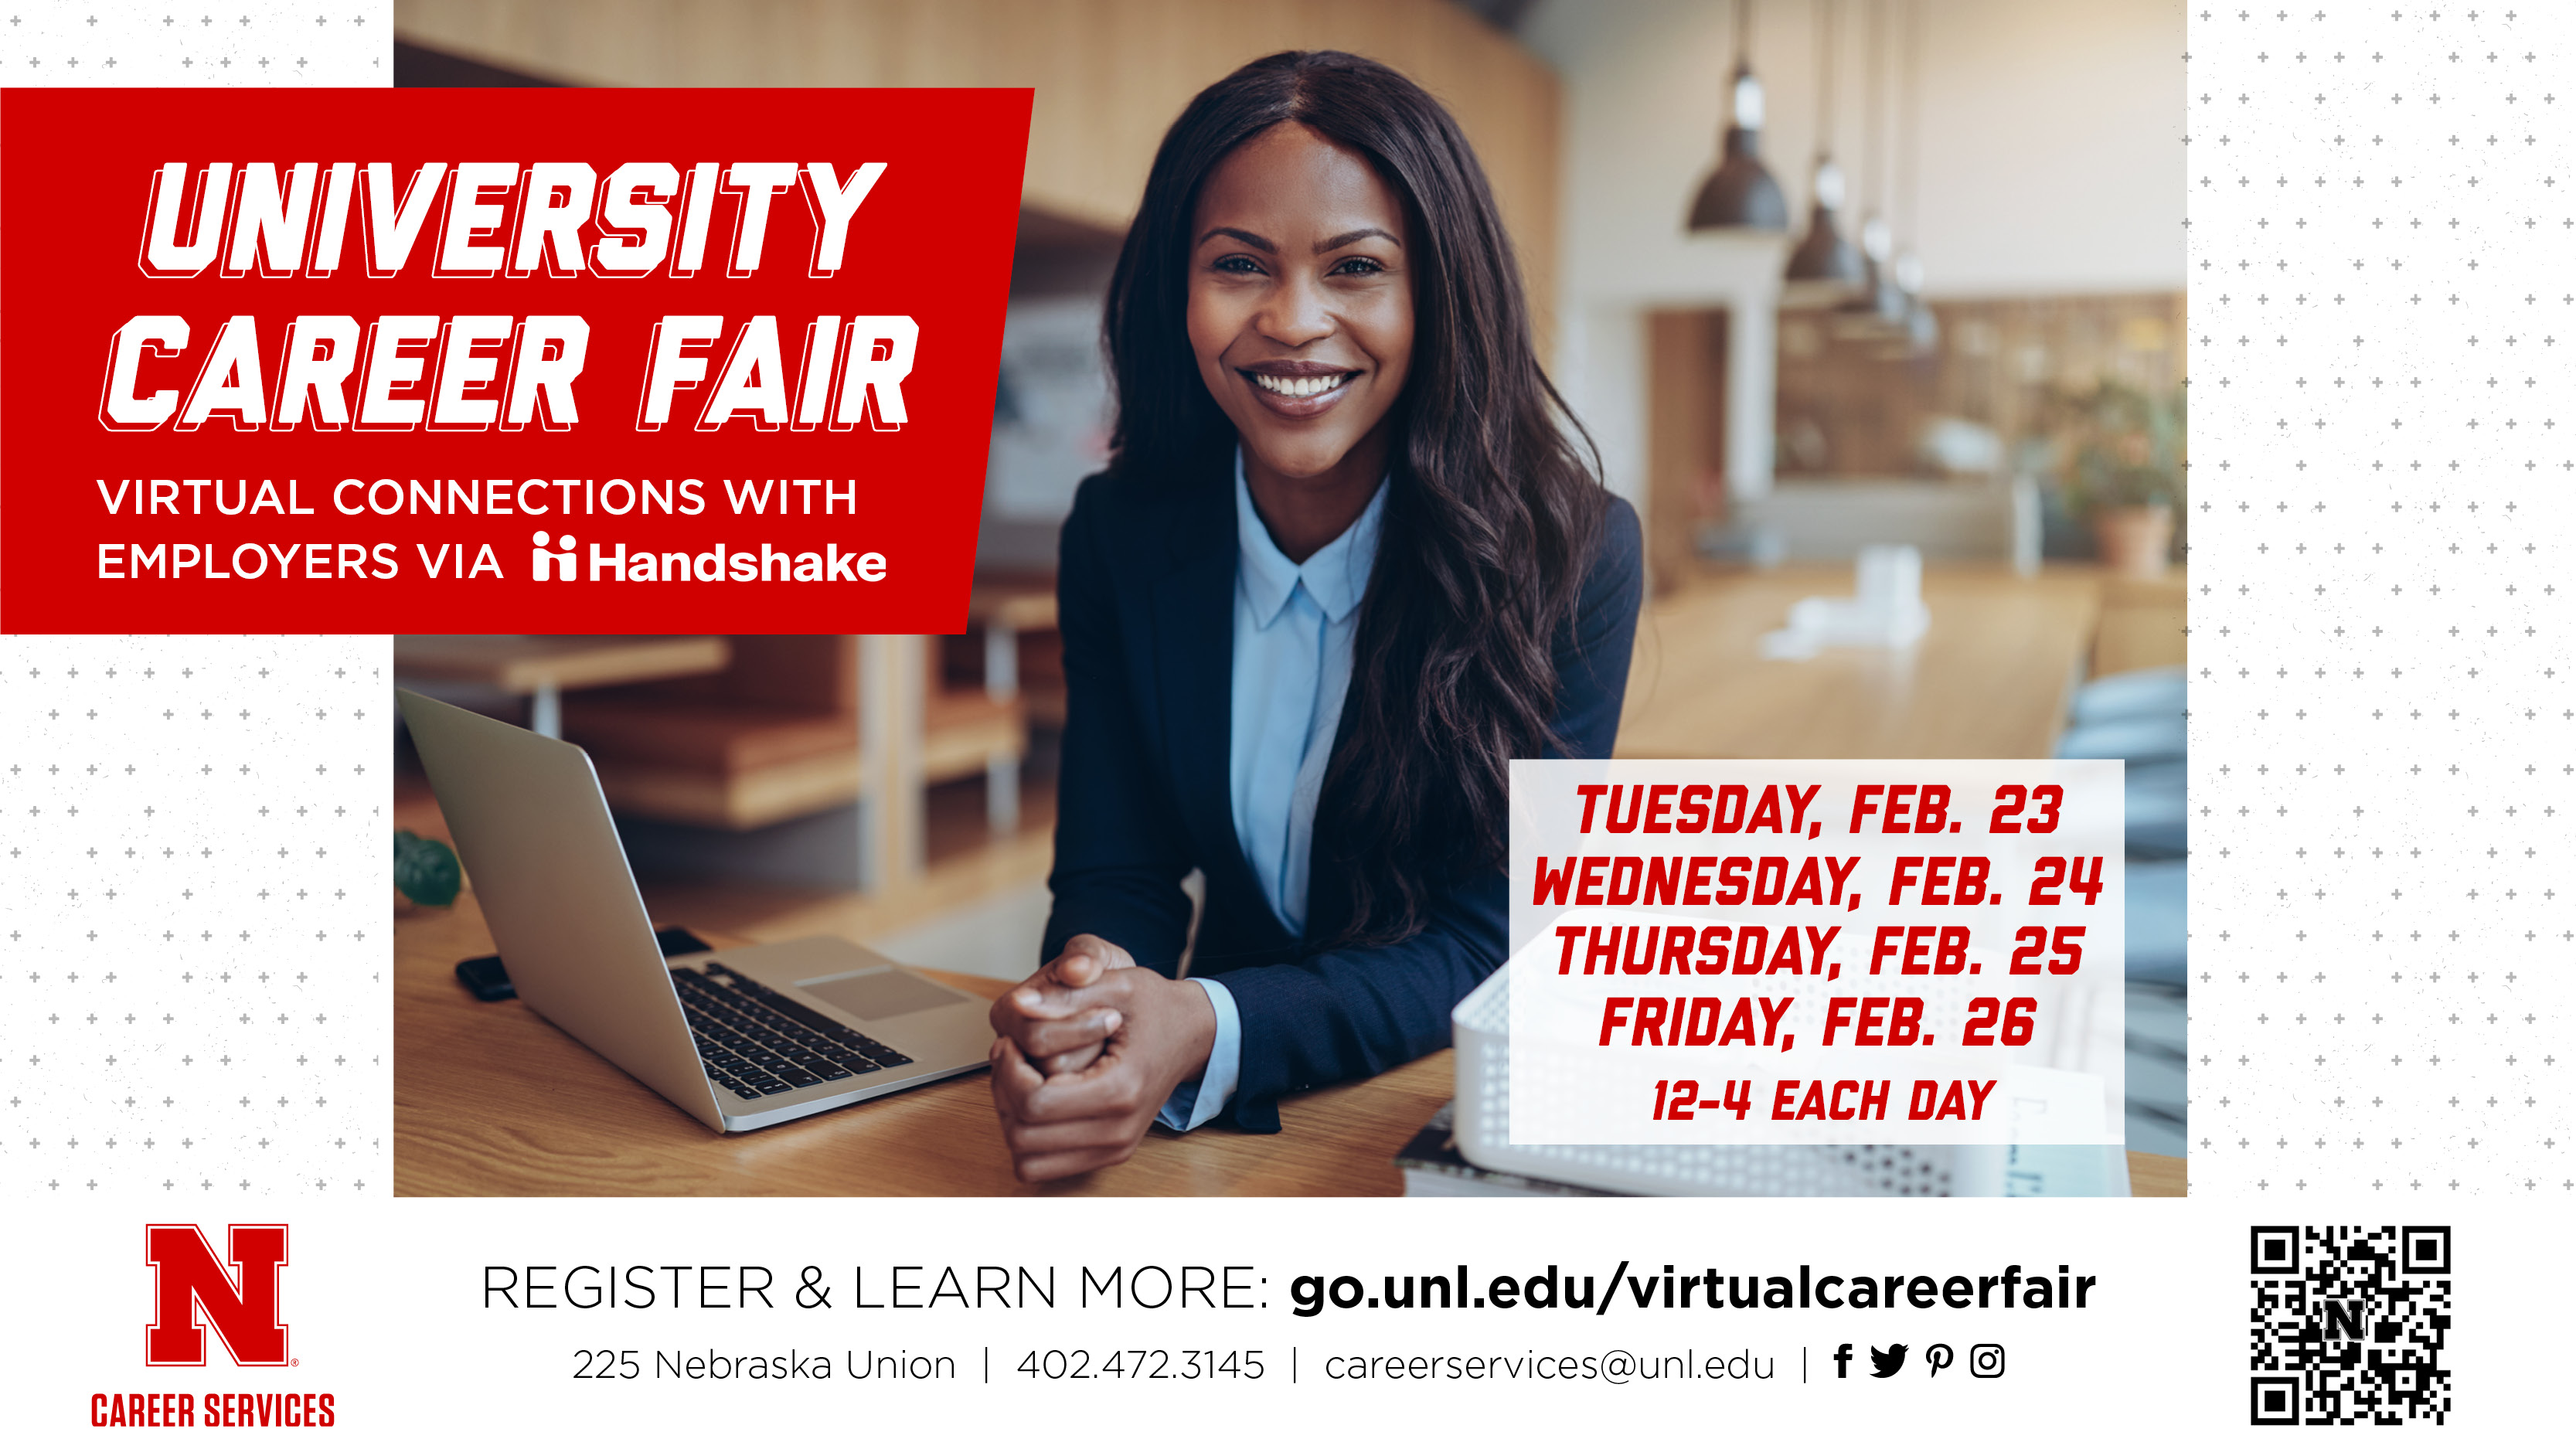 Last Call To Register For The Career Fair Announce University of